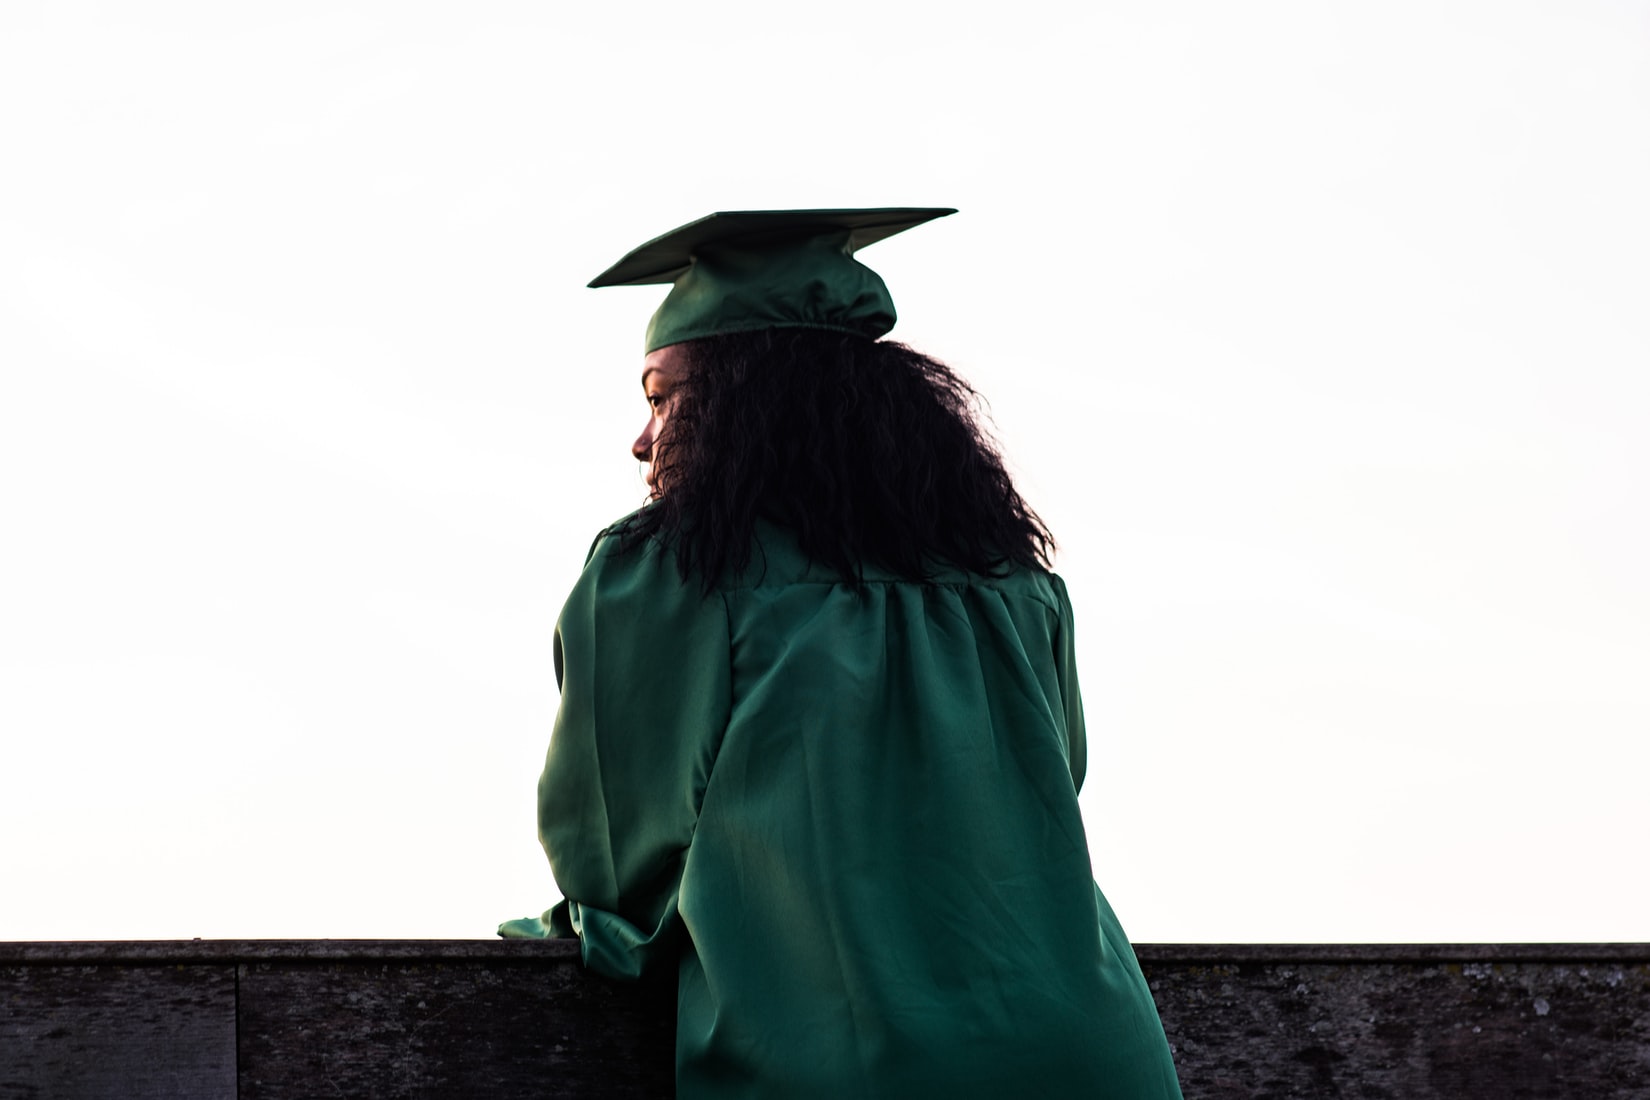 Graduated College – Now What?